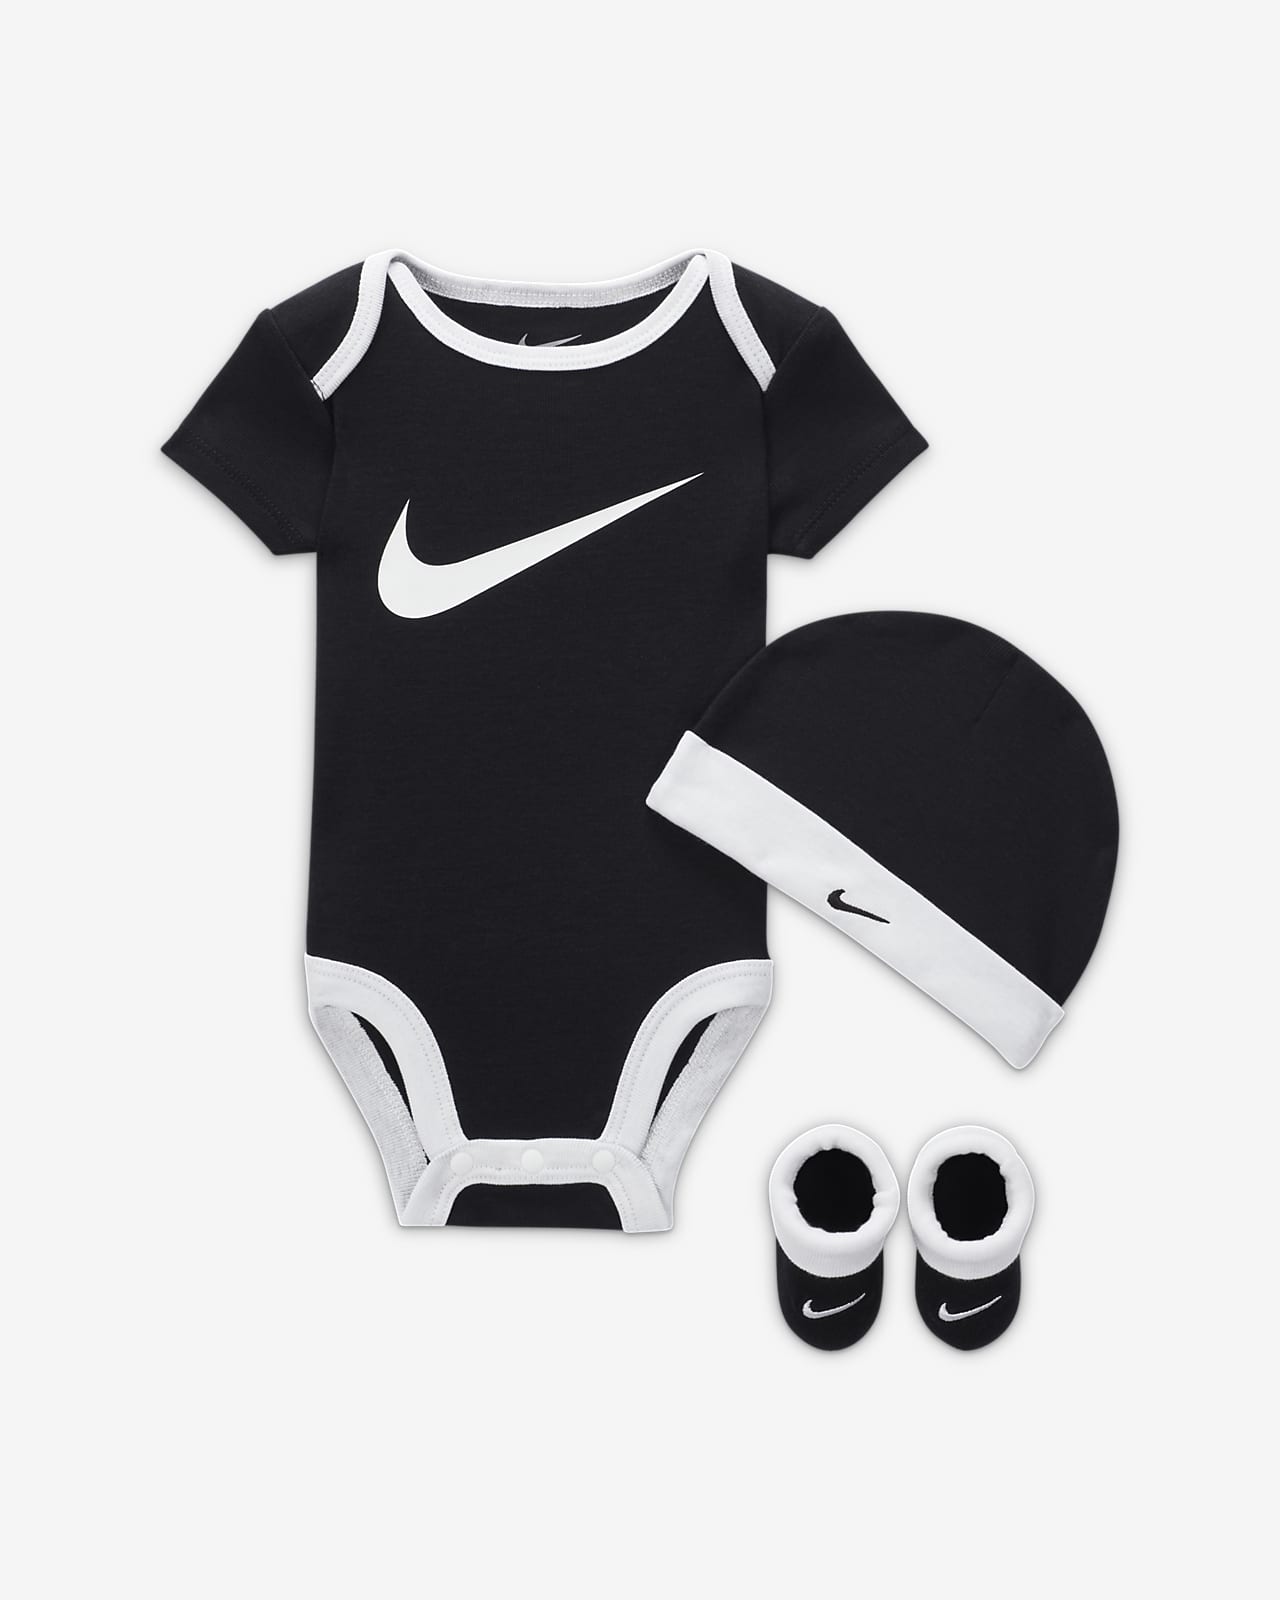 Nike Baby (0-6M) Bodysuit, Hat Box Set. Booties and